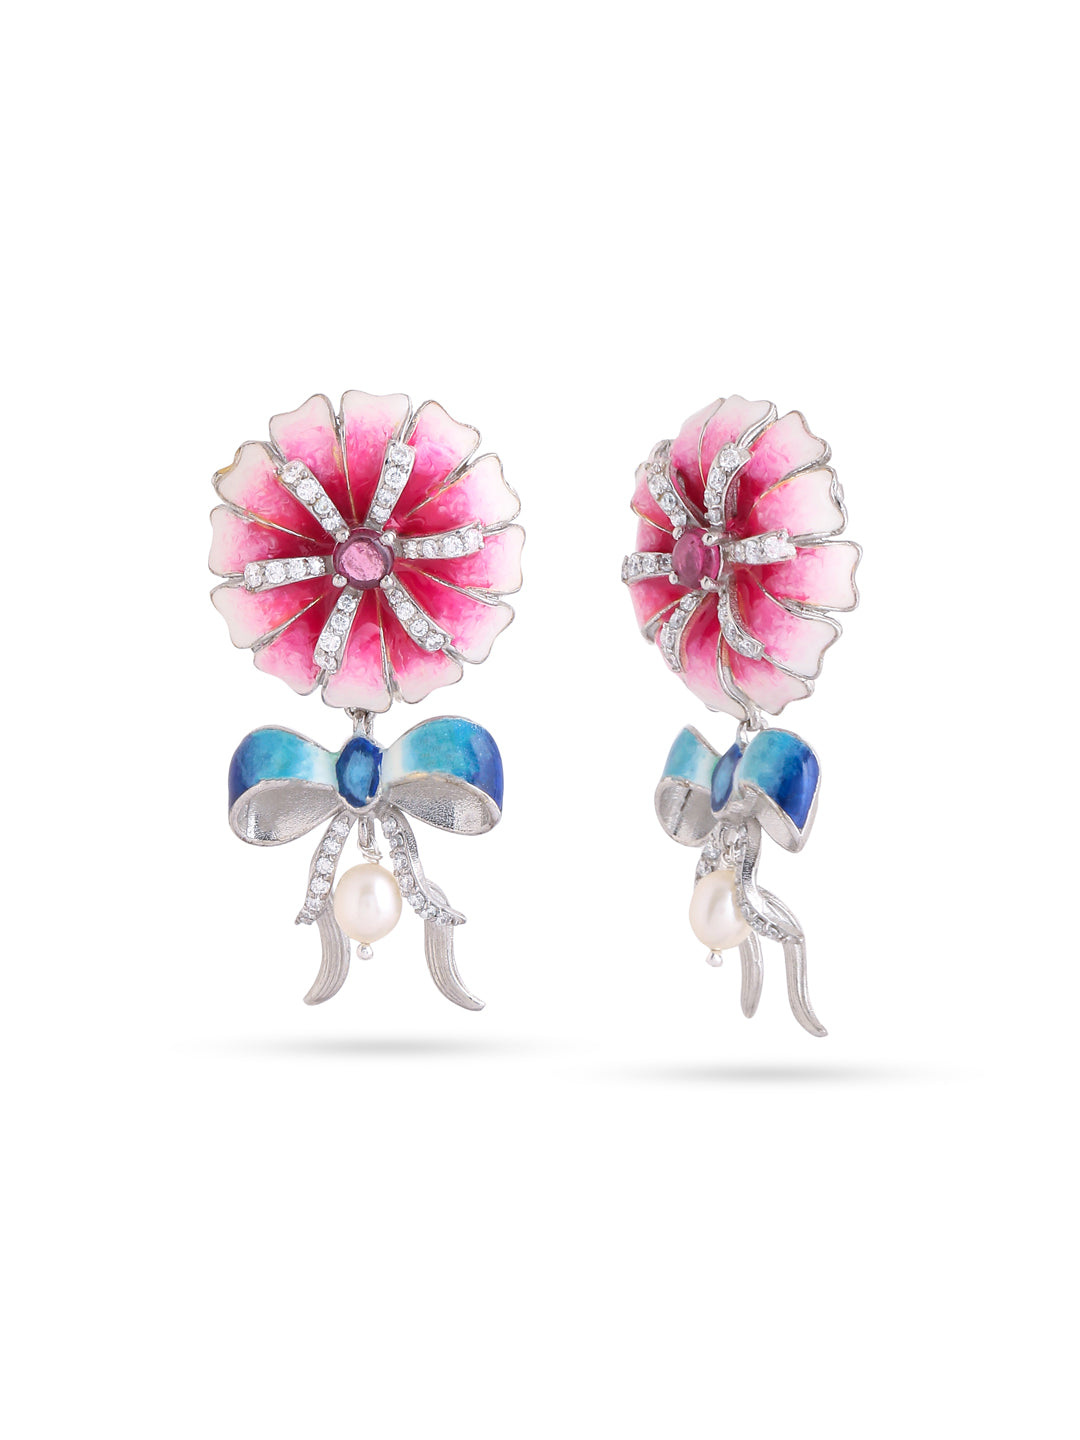 Enchanted Floral Bow Earrings